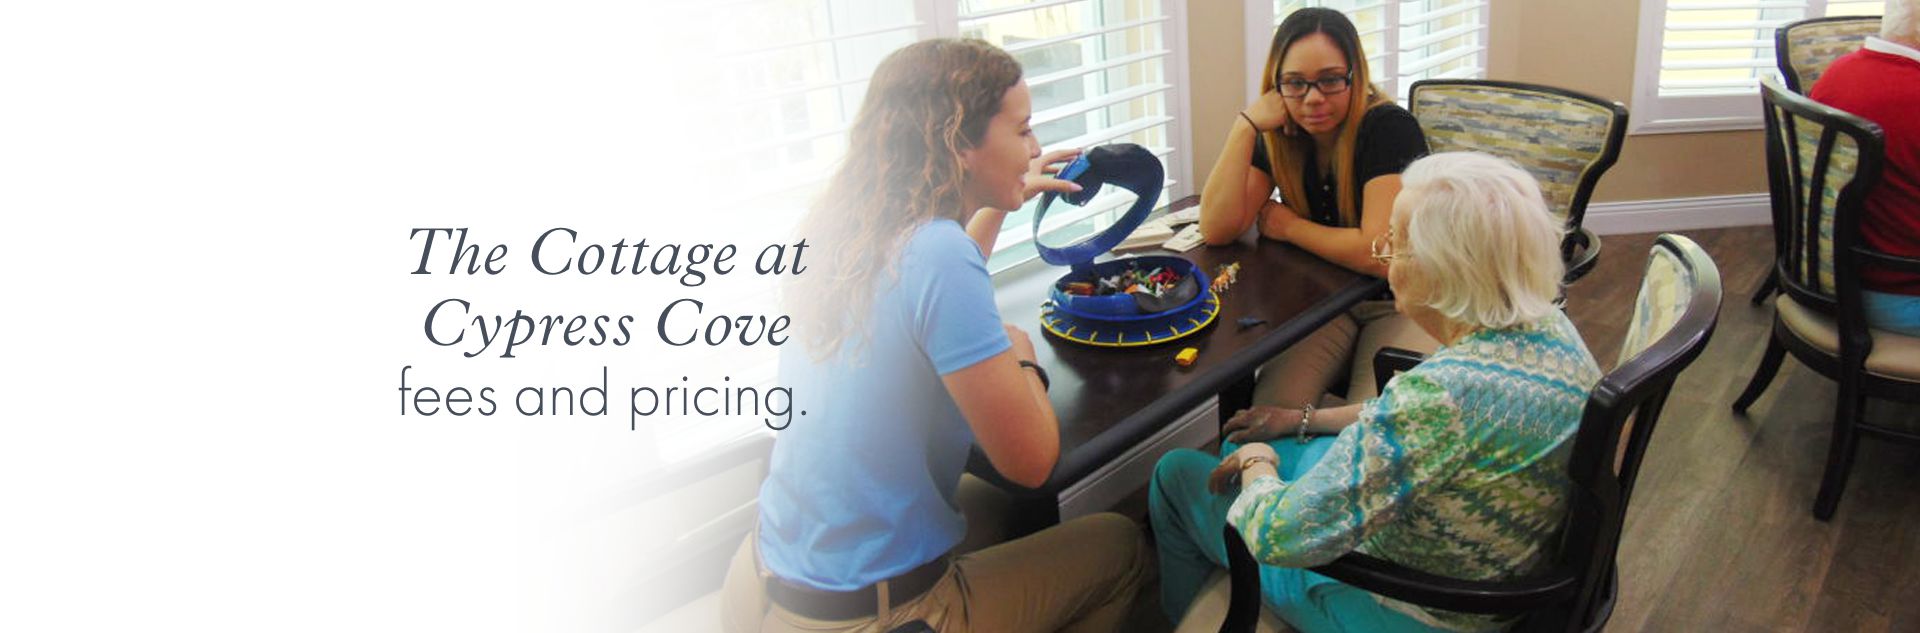 The Cottage at Cypress Cove, Assisted Living fees and pricing.